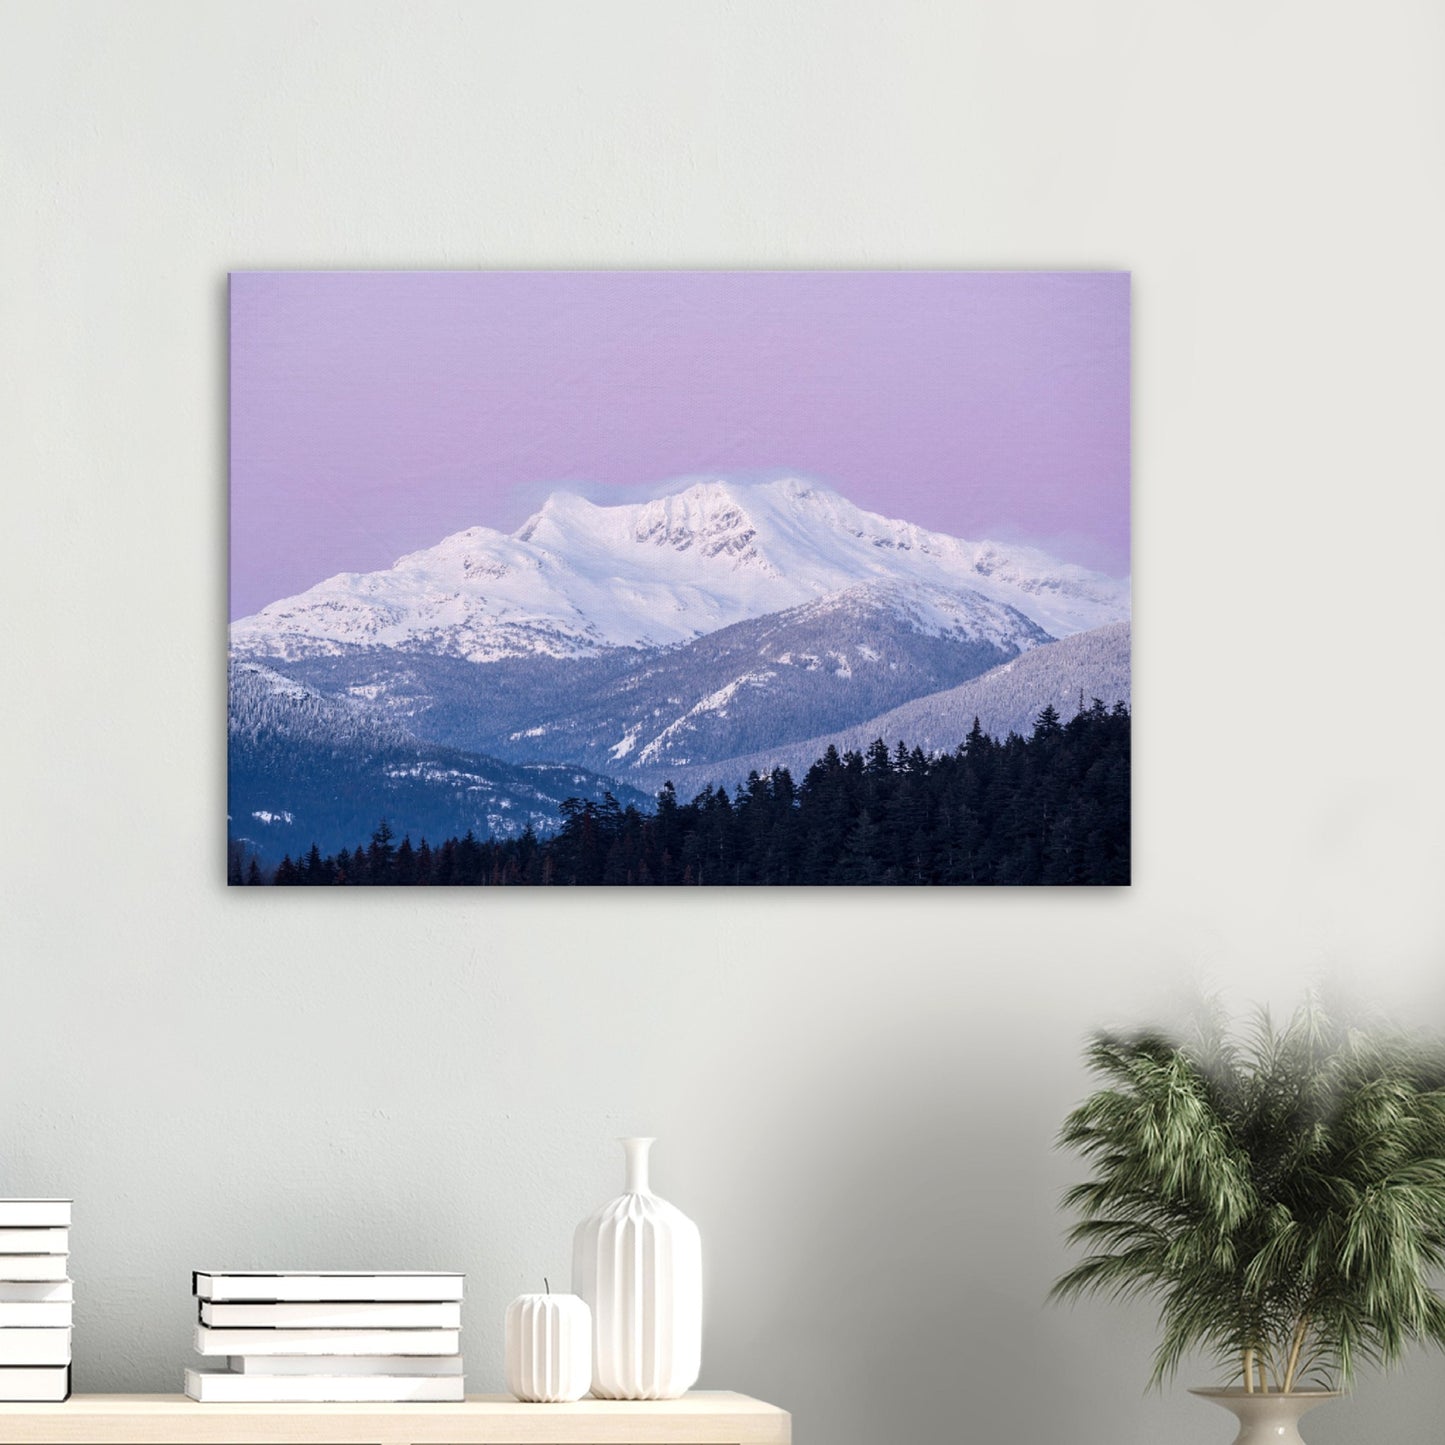 Mount Currie Sunset View from Alta Lake in Whistler, BC - Landscape Canvas Print - British Columbia, Canada